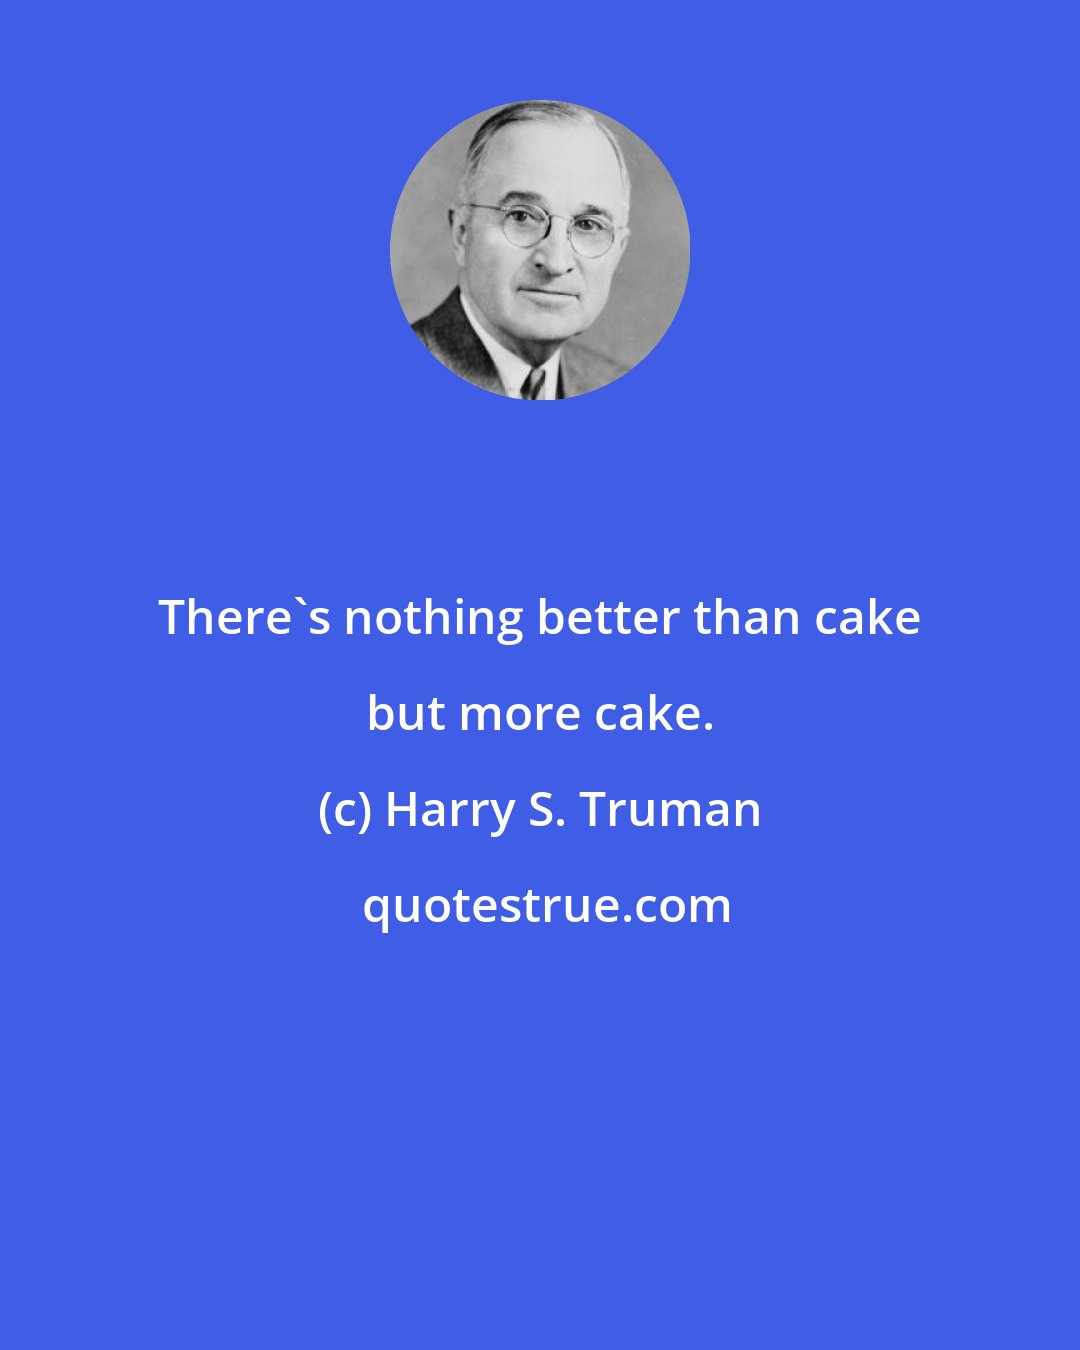 Harry S. Truman: There's nothing better than cake but more cake.